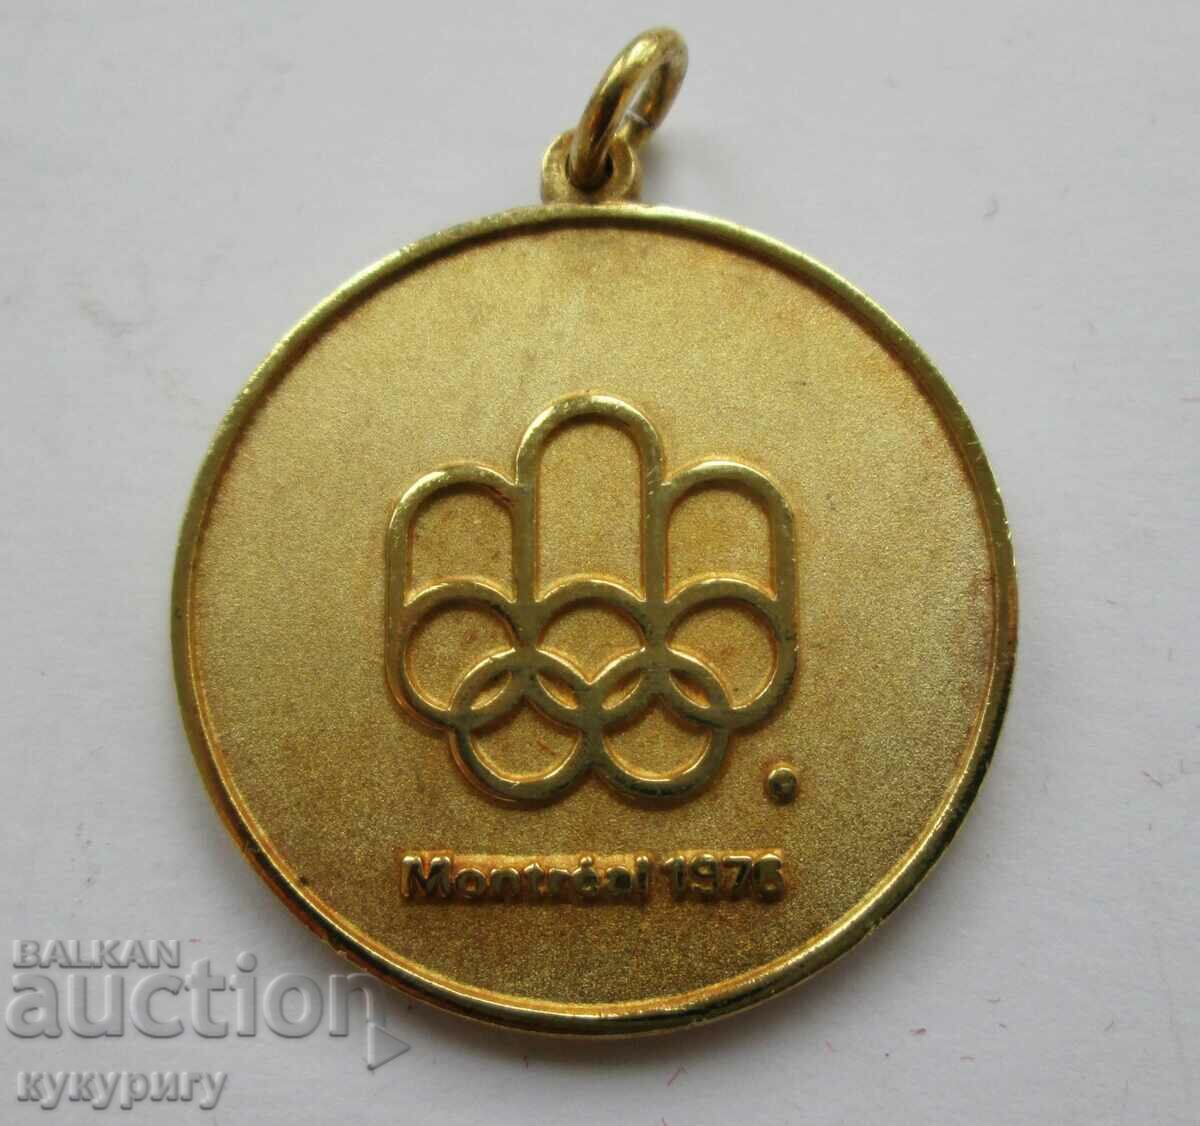 Old Olympic sign medal Olympiad Montreal 76